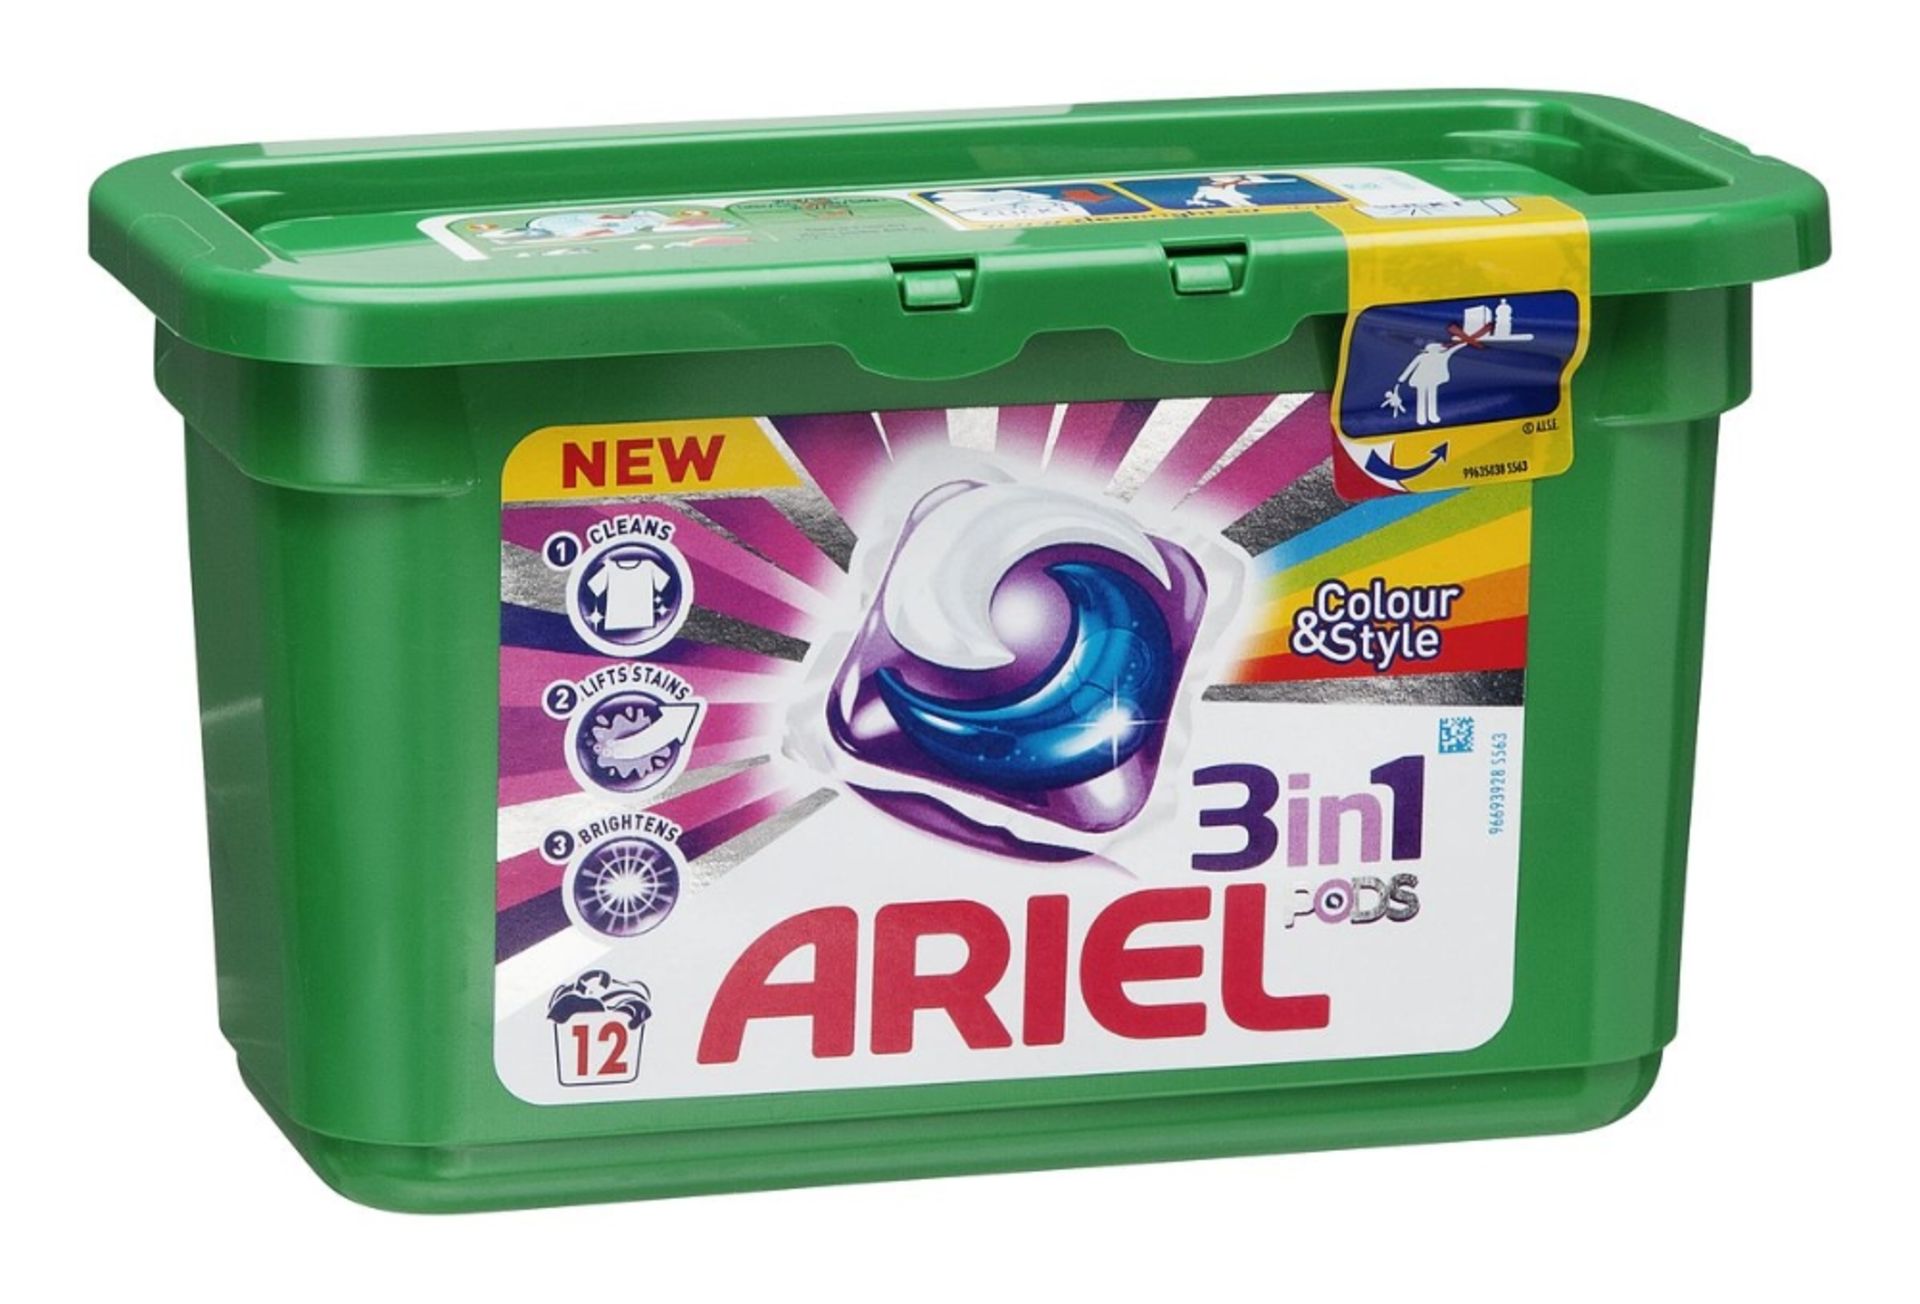 V Brand New Ariel 3 In 1 Pods Colour 12 Pack X 2 YOUR BID PRICE TO BE MULTIPLIED BY TWO